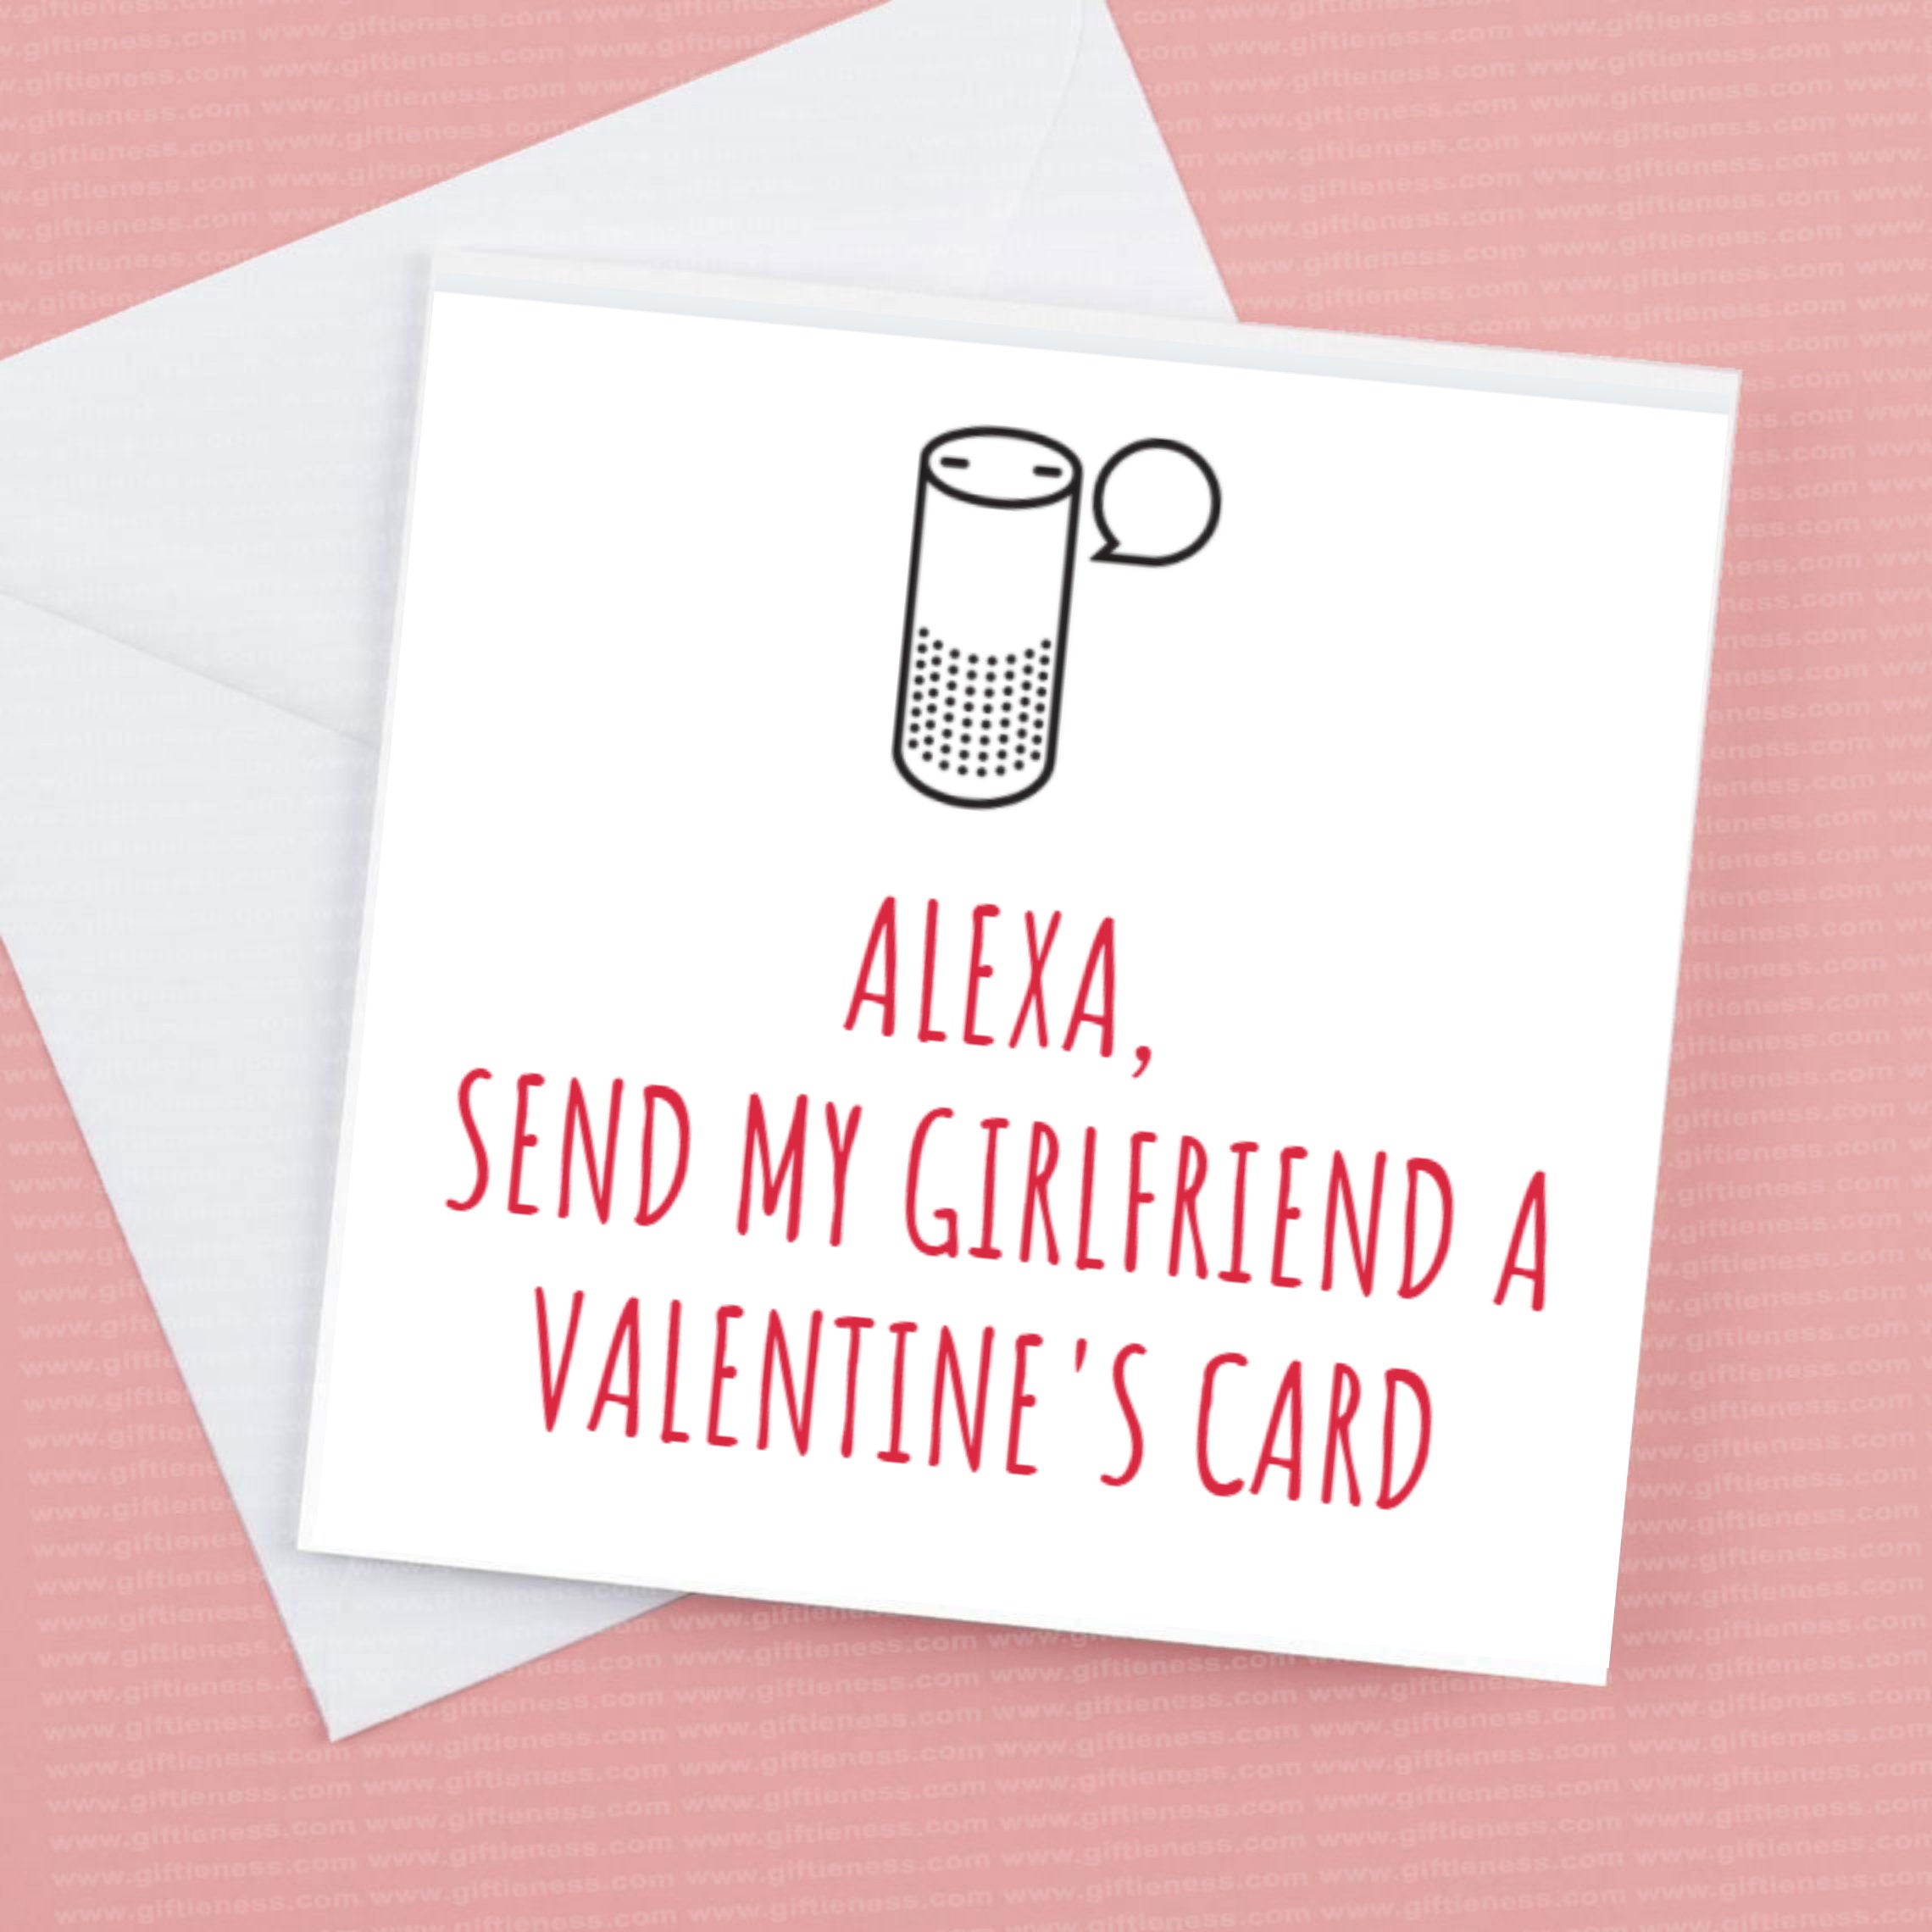 Valentines Card from Alexa, from Girlfriend, Wife, boyfriend or husband - options available